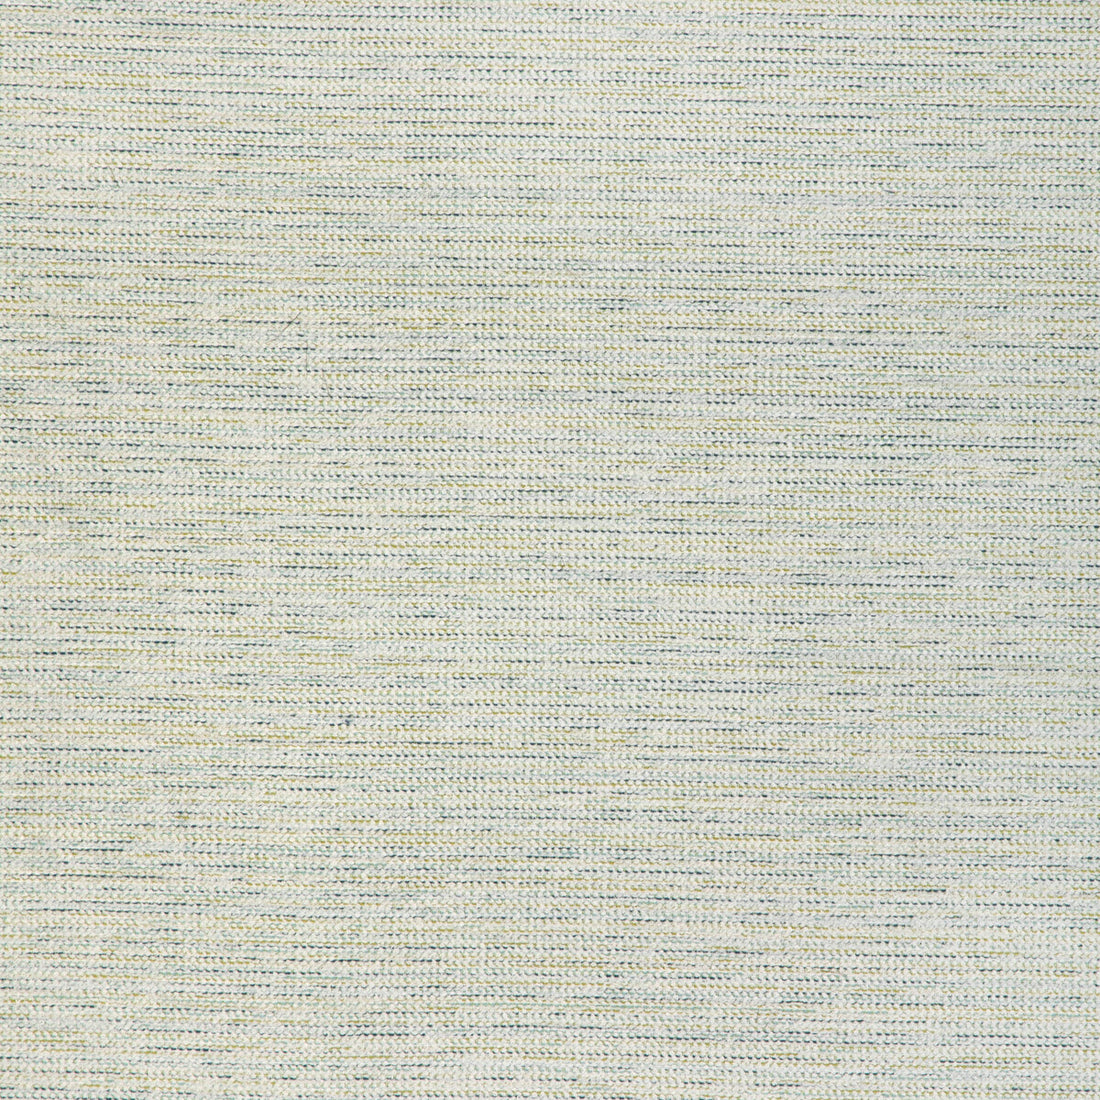 Kravet Design fabric in 36882-315 color - pattern 36882.315.0 - by Kravet Design in the Insideout Seaqual Initiative collection